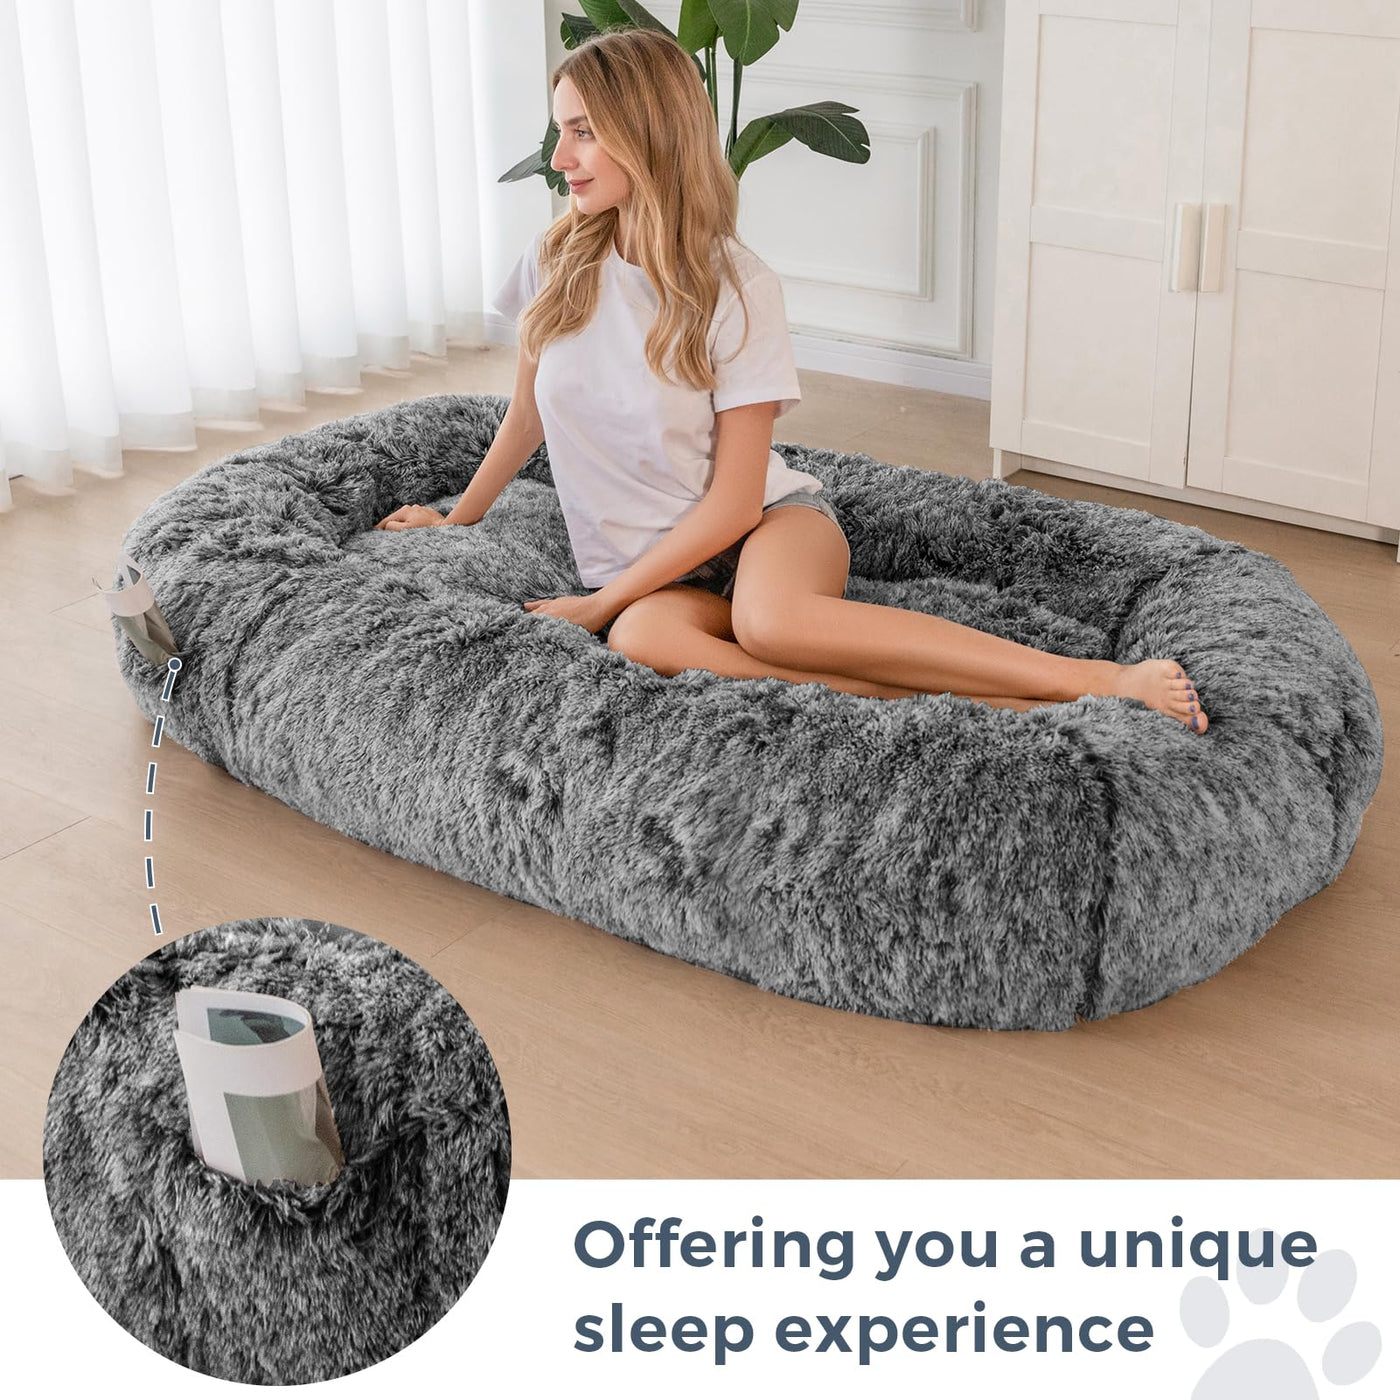 MAXYOYO Dog Bed for Human, Faux Fur Giant Bean Bag Bed for People Adults, 72.8"x45.3"x12"